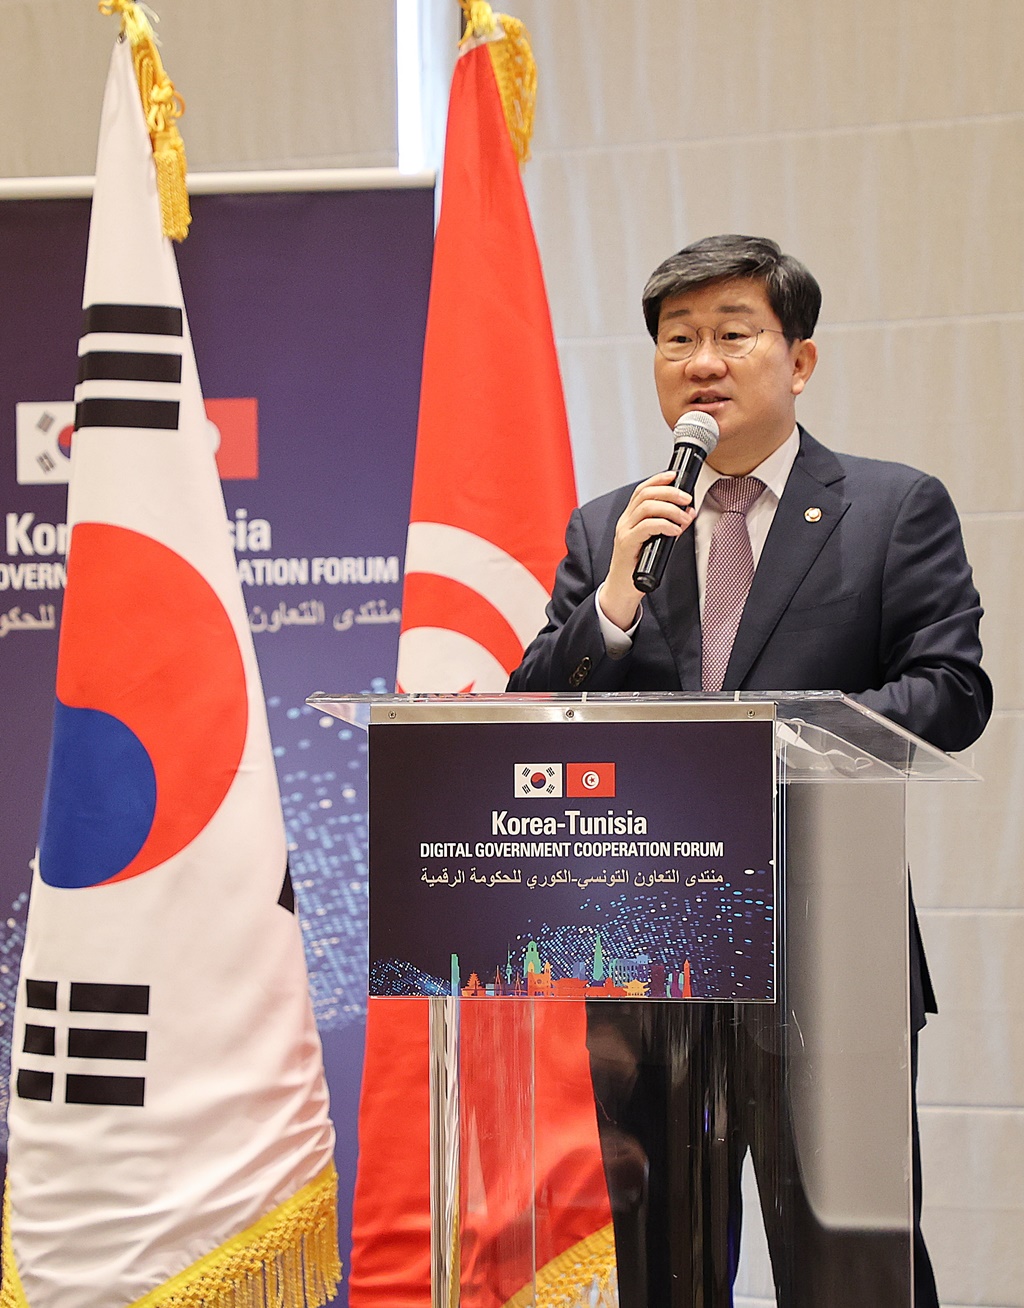 Minister Jeon Hae-cheol gives a brief speech at the 'Korea-Tunisia Digital Government Cooperation Forum' held at the Four Seasons Hotel in Tunis, the capital of Tunisia, on the afternoon of the 28th (local time).